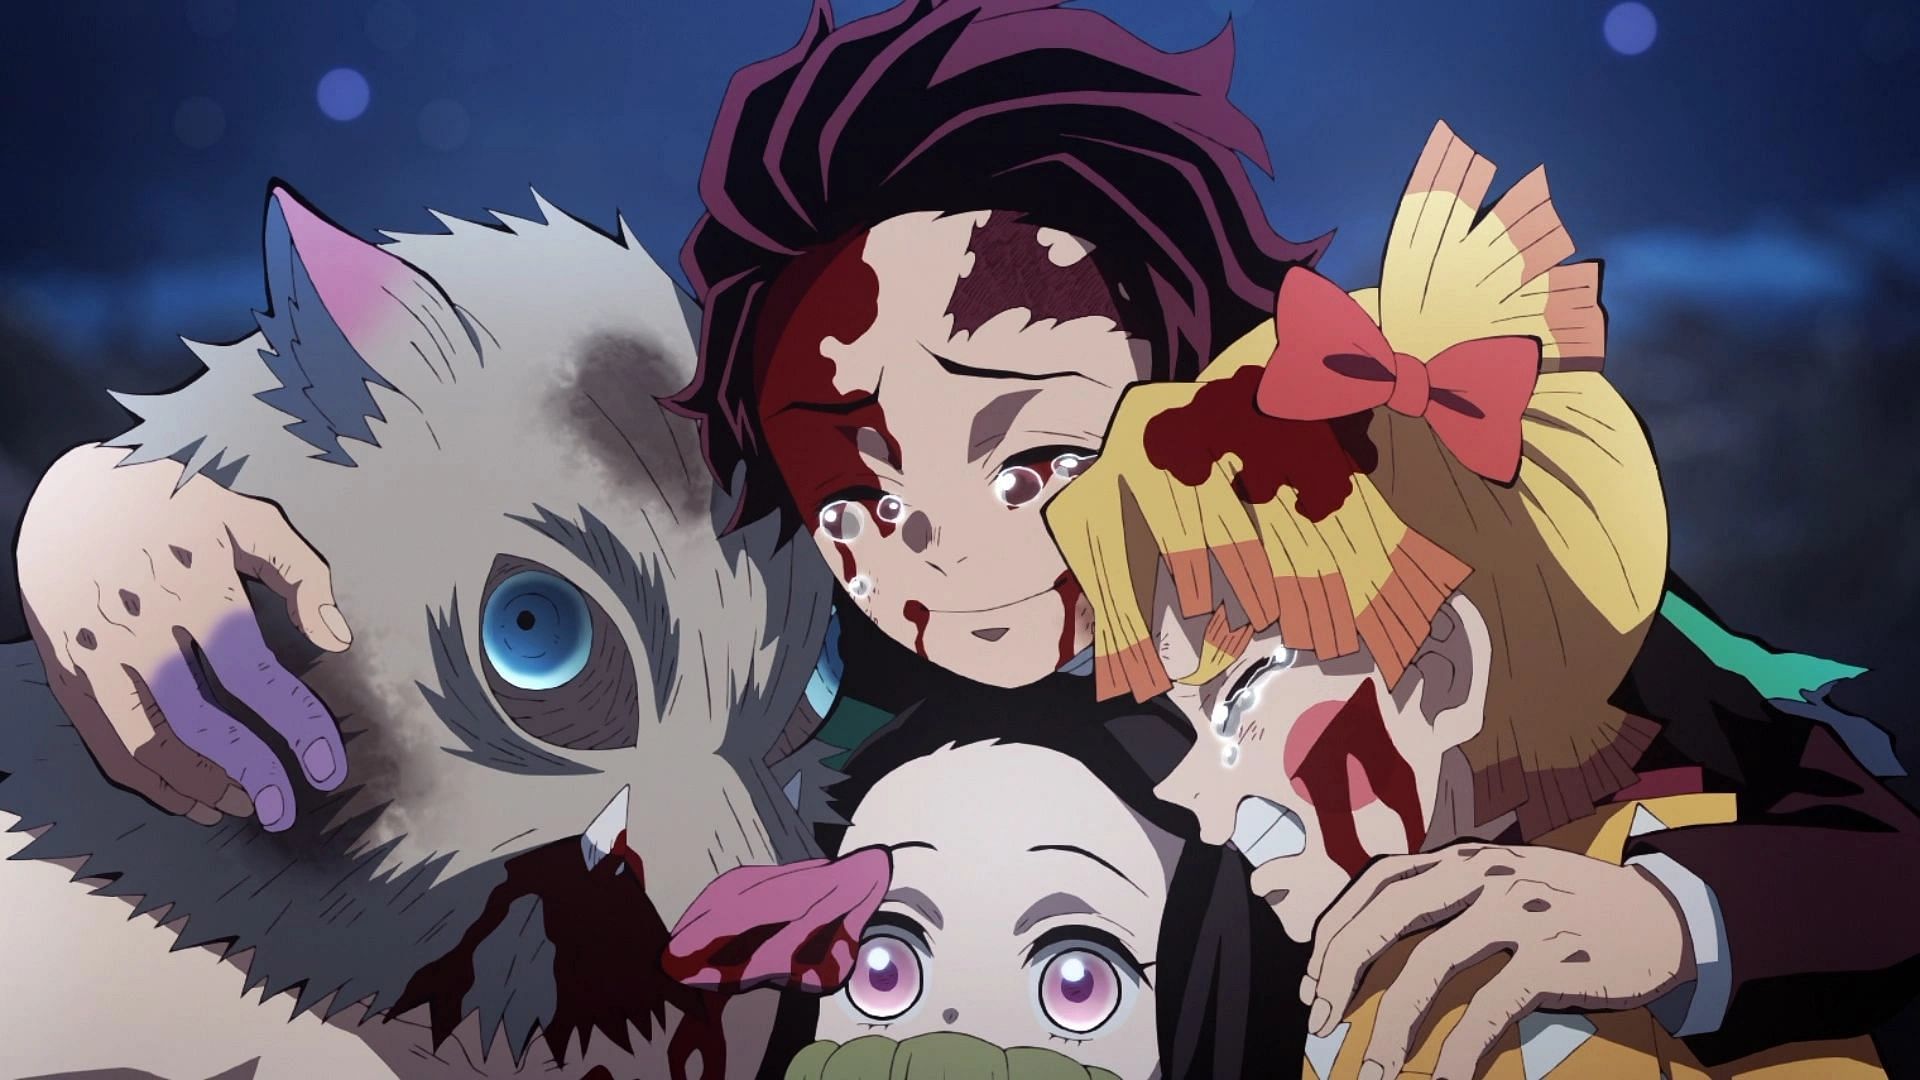 Will there be a Demon Slayer Season 4?